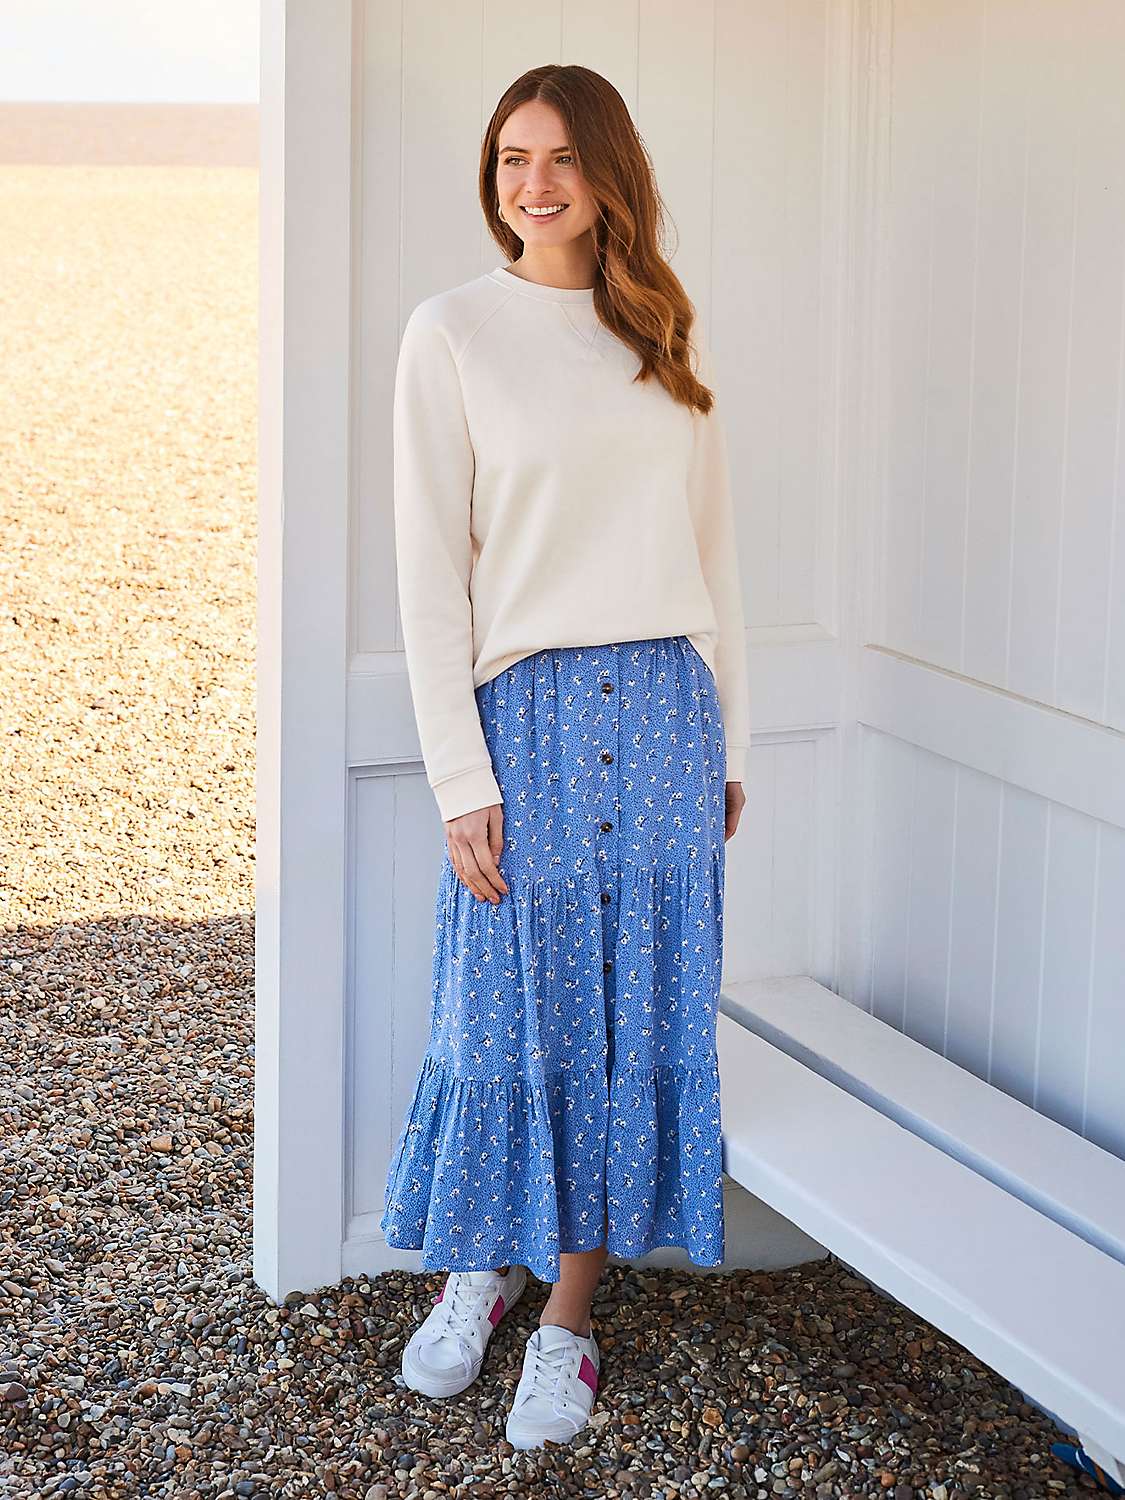 Buy Crew Clothing Daisy Print Button Front Tiered Midi Skirt, Blue/Multi Online at johnlewis.com